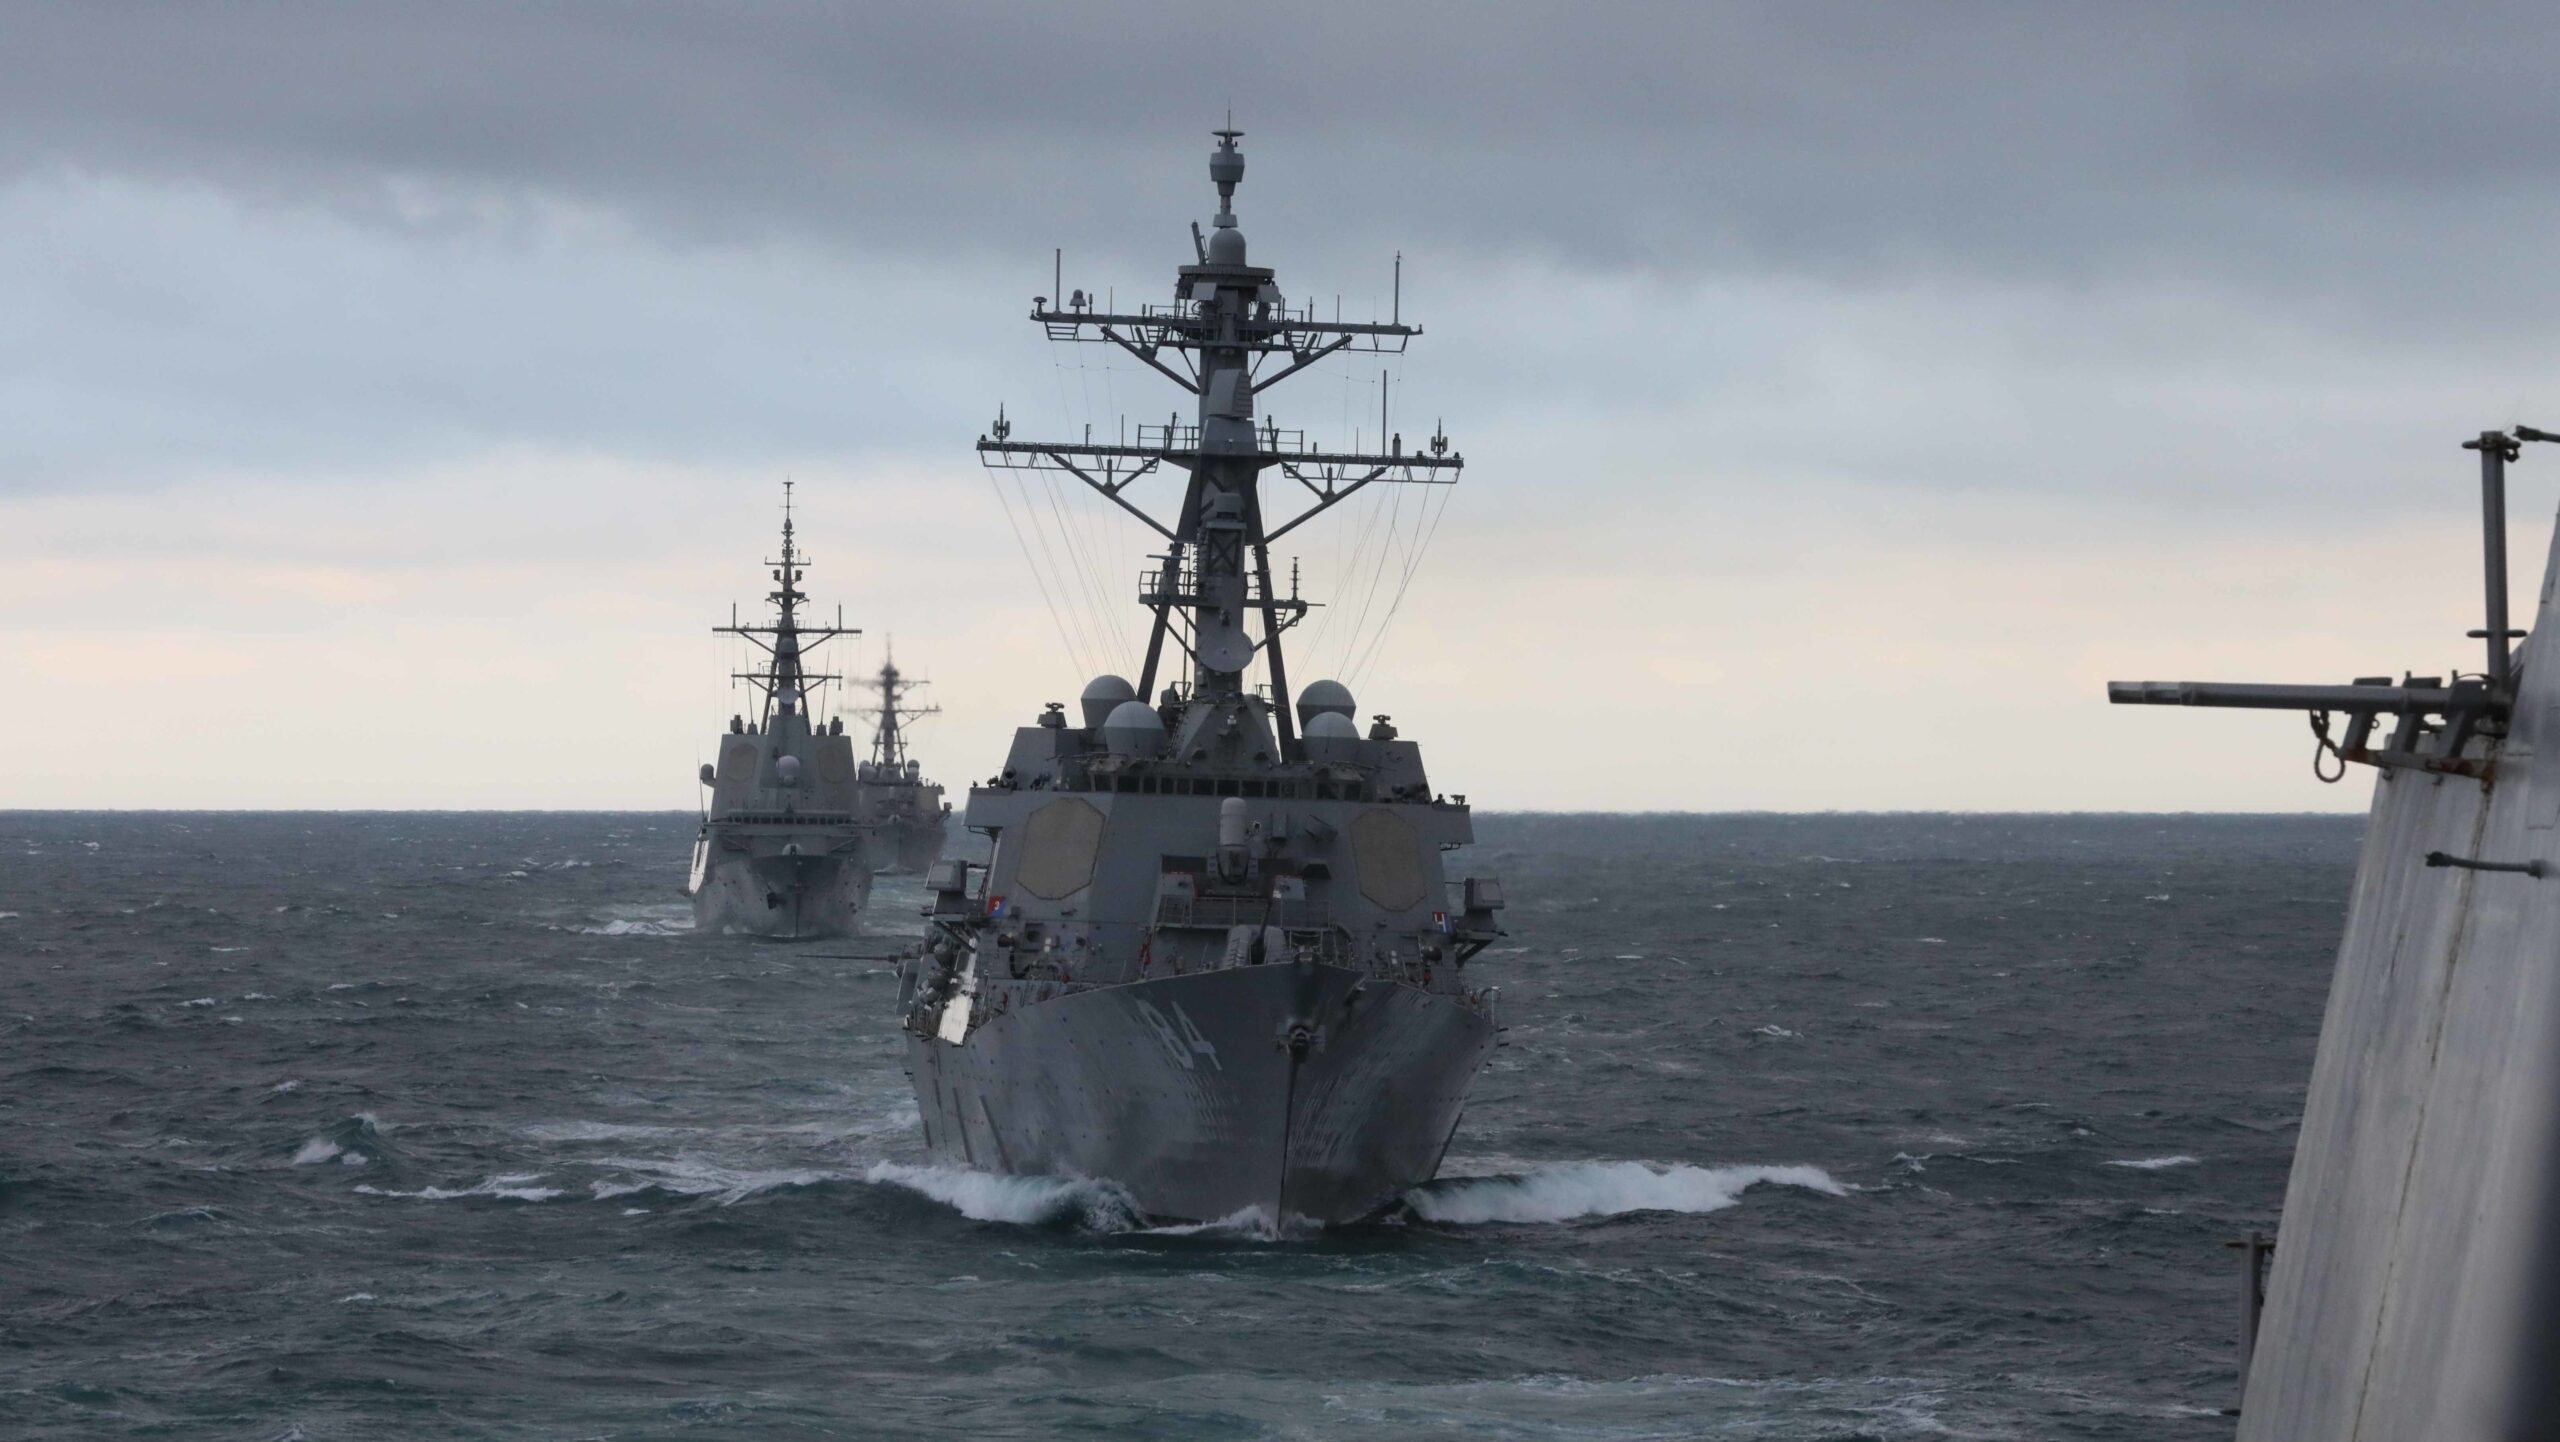 The surface Navy should design for competition, rethink fleet make-up